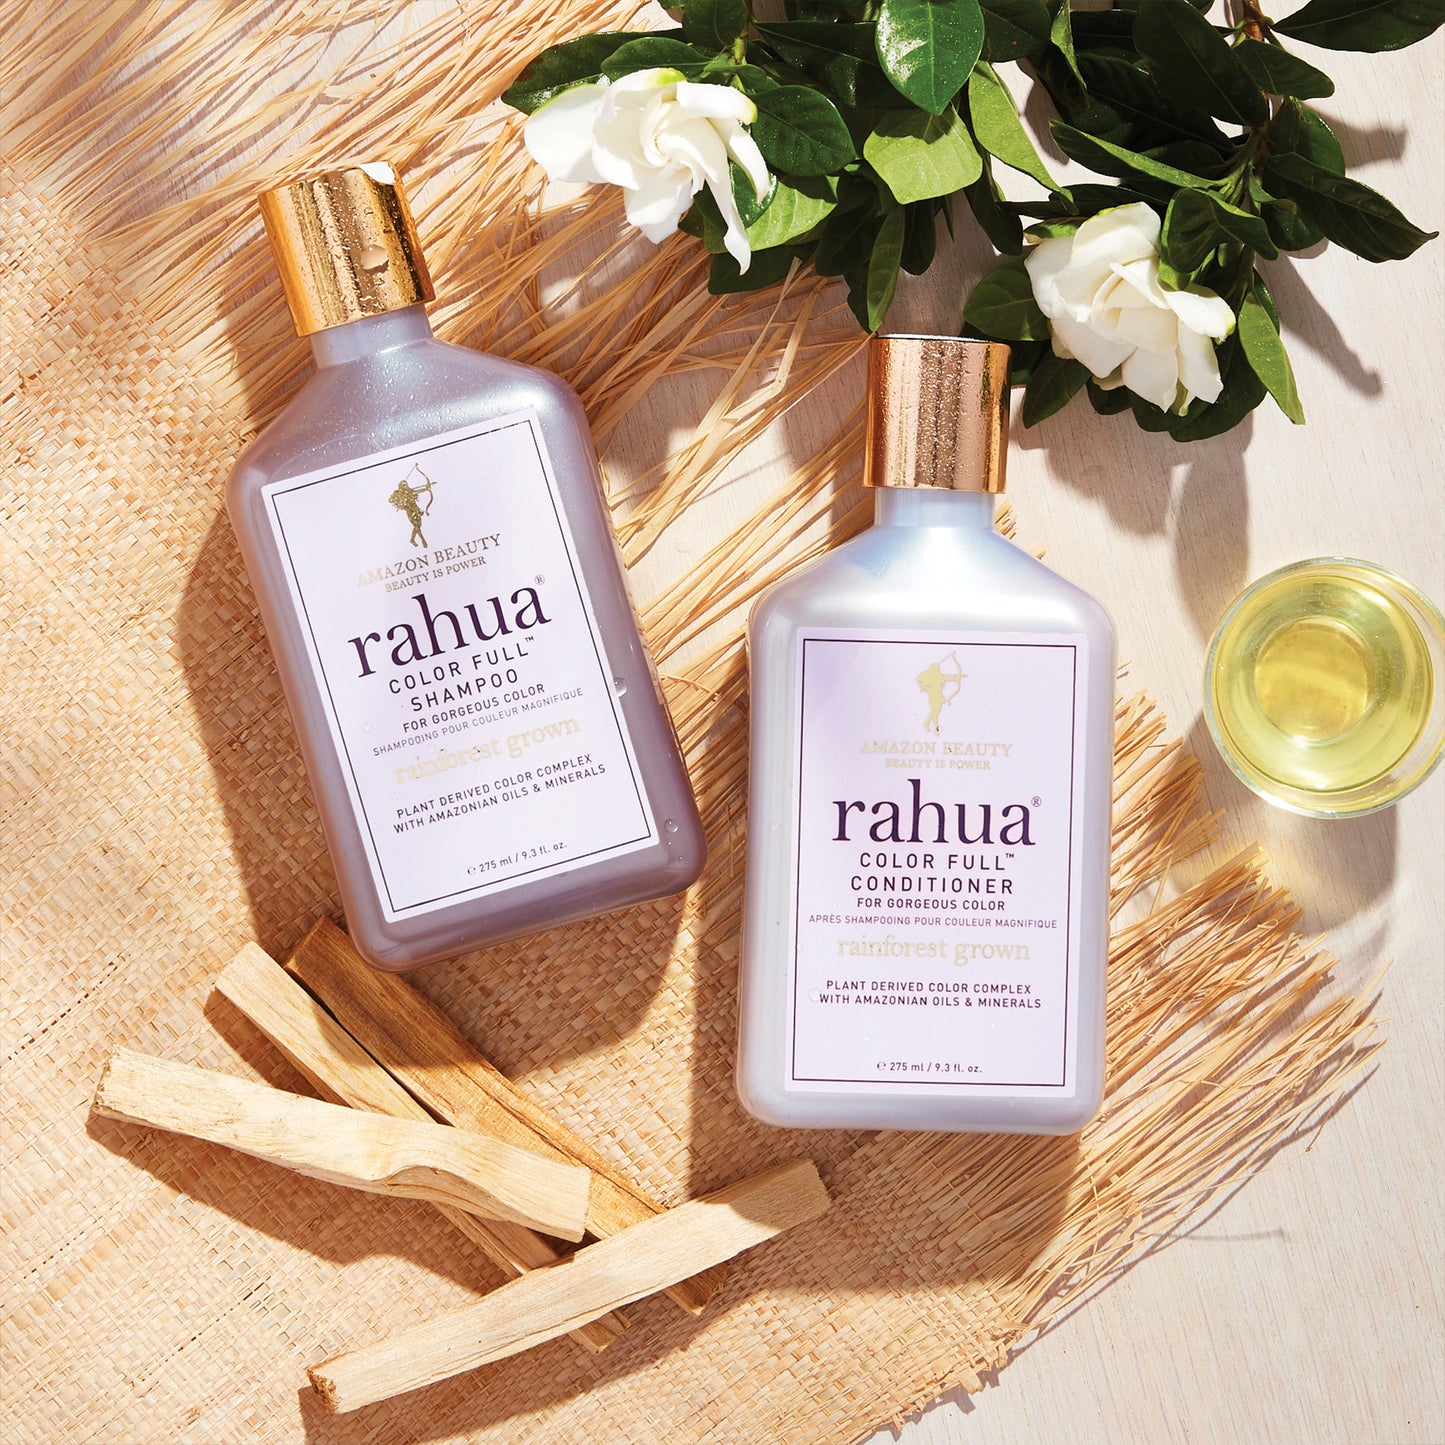 Rahua Color Full Shampoo and conditioner with oil